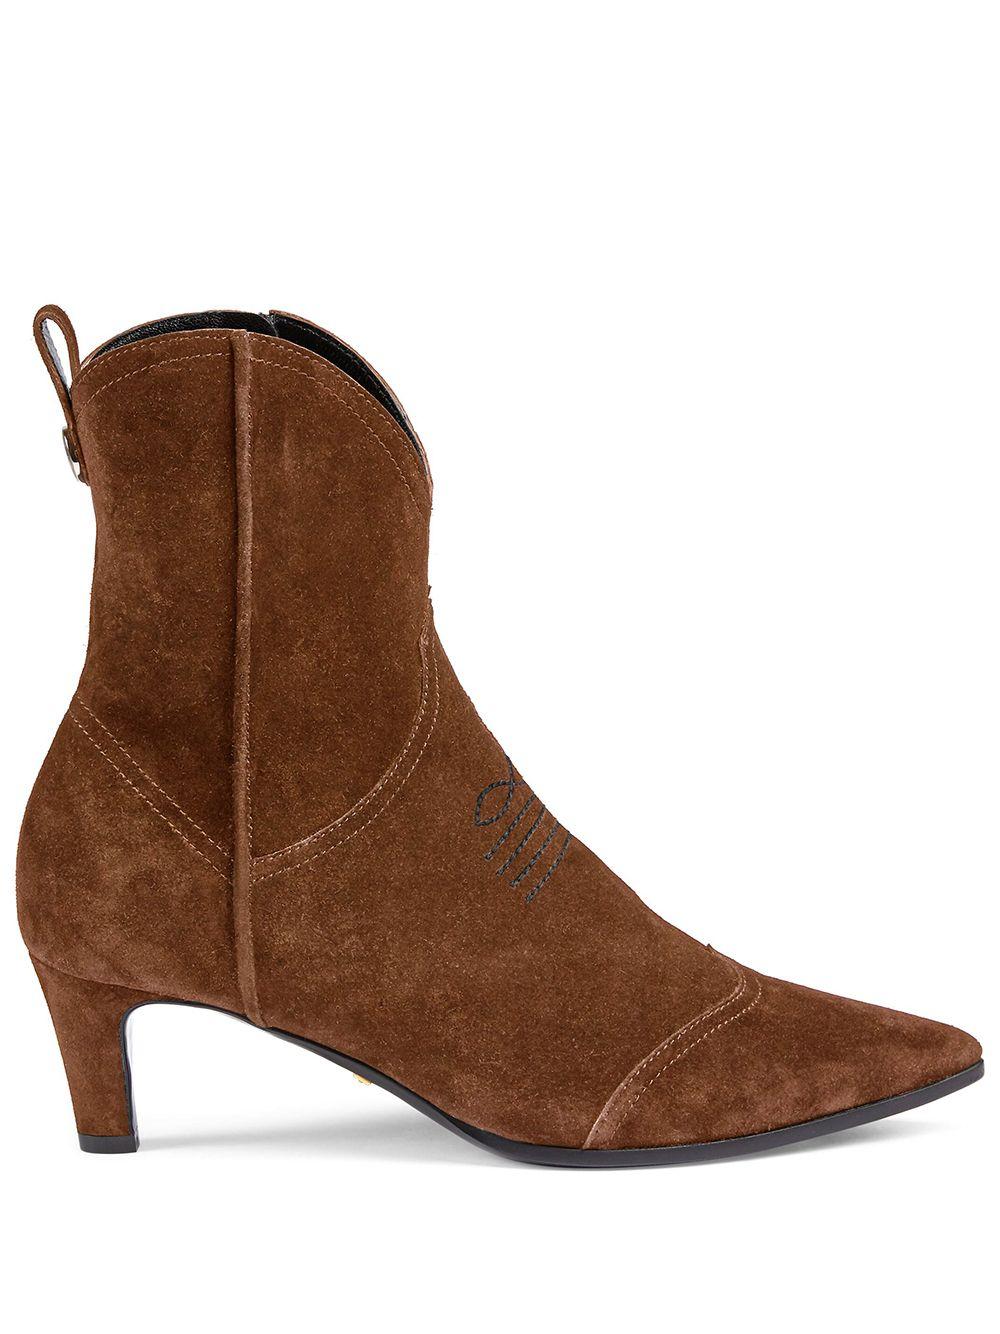 Gucci Western Suede Ankle Boots in Brown | Lyst